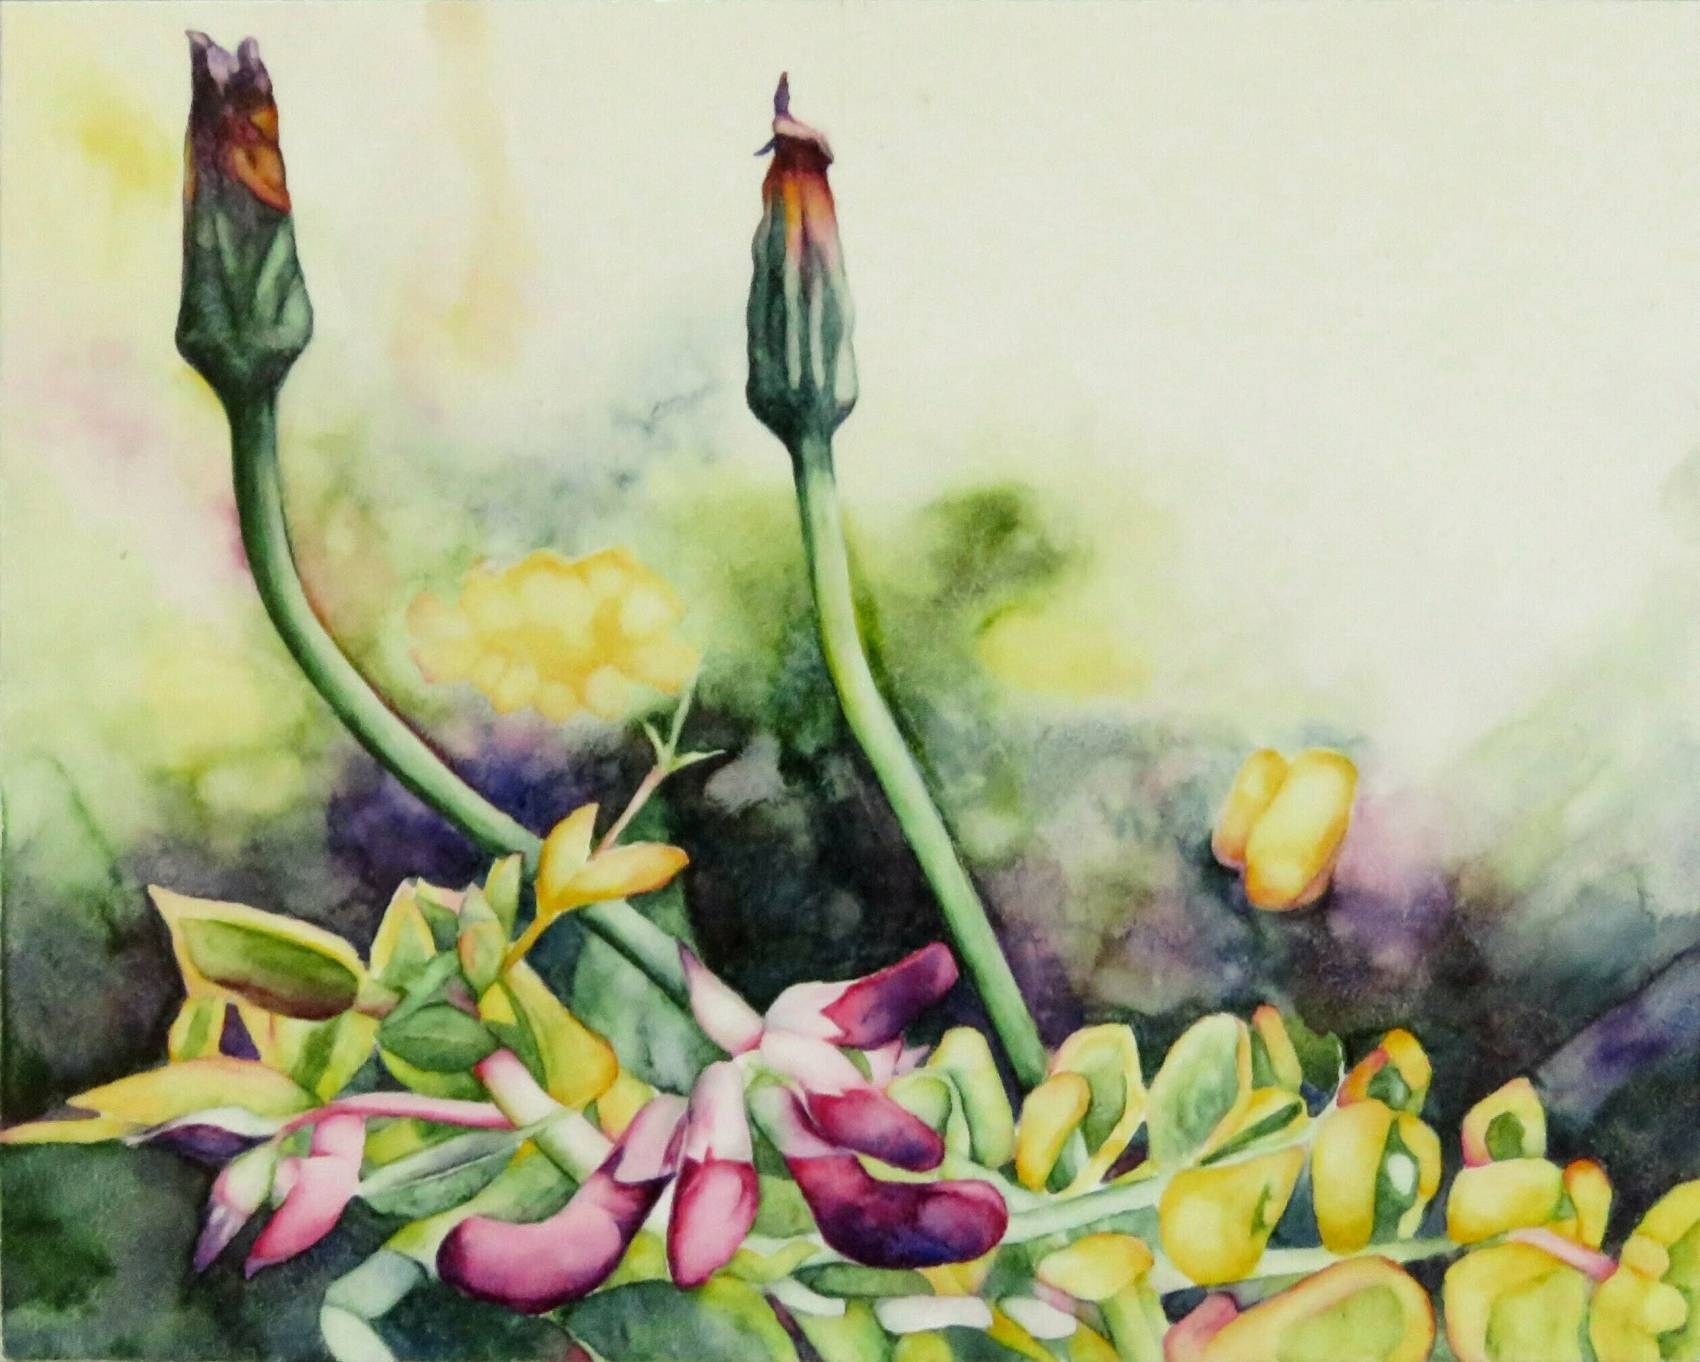 catherine-macaulay-beach-peas-floral-watercolour-contemporary-flower-painting-online-gallery